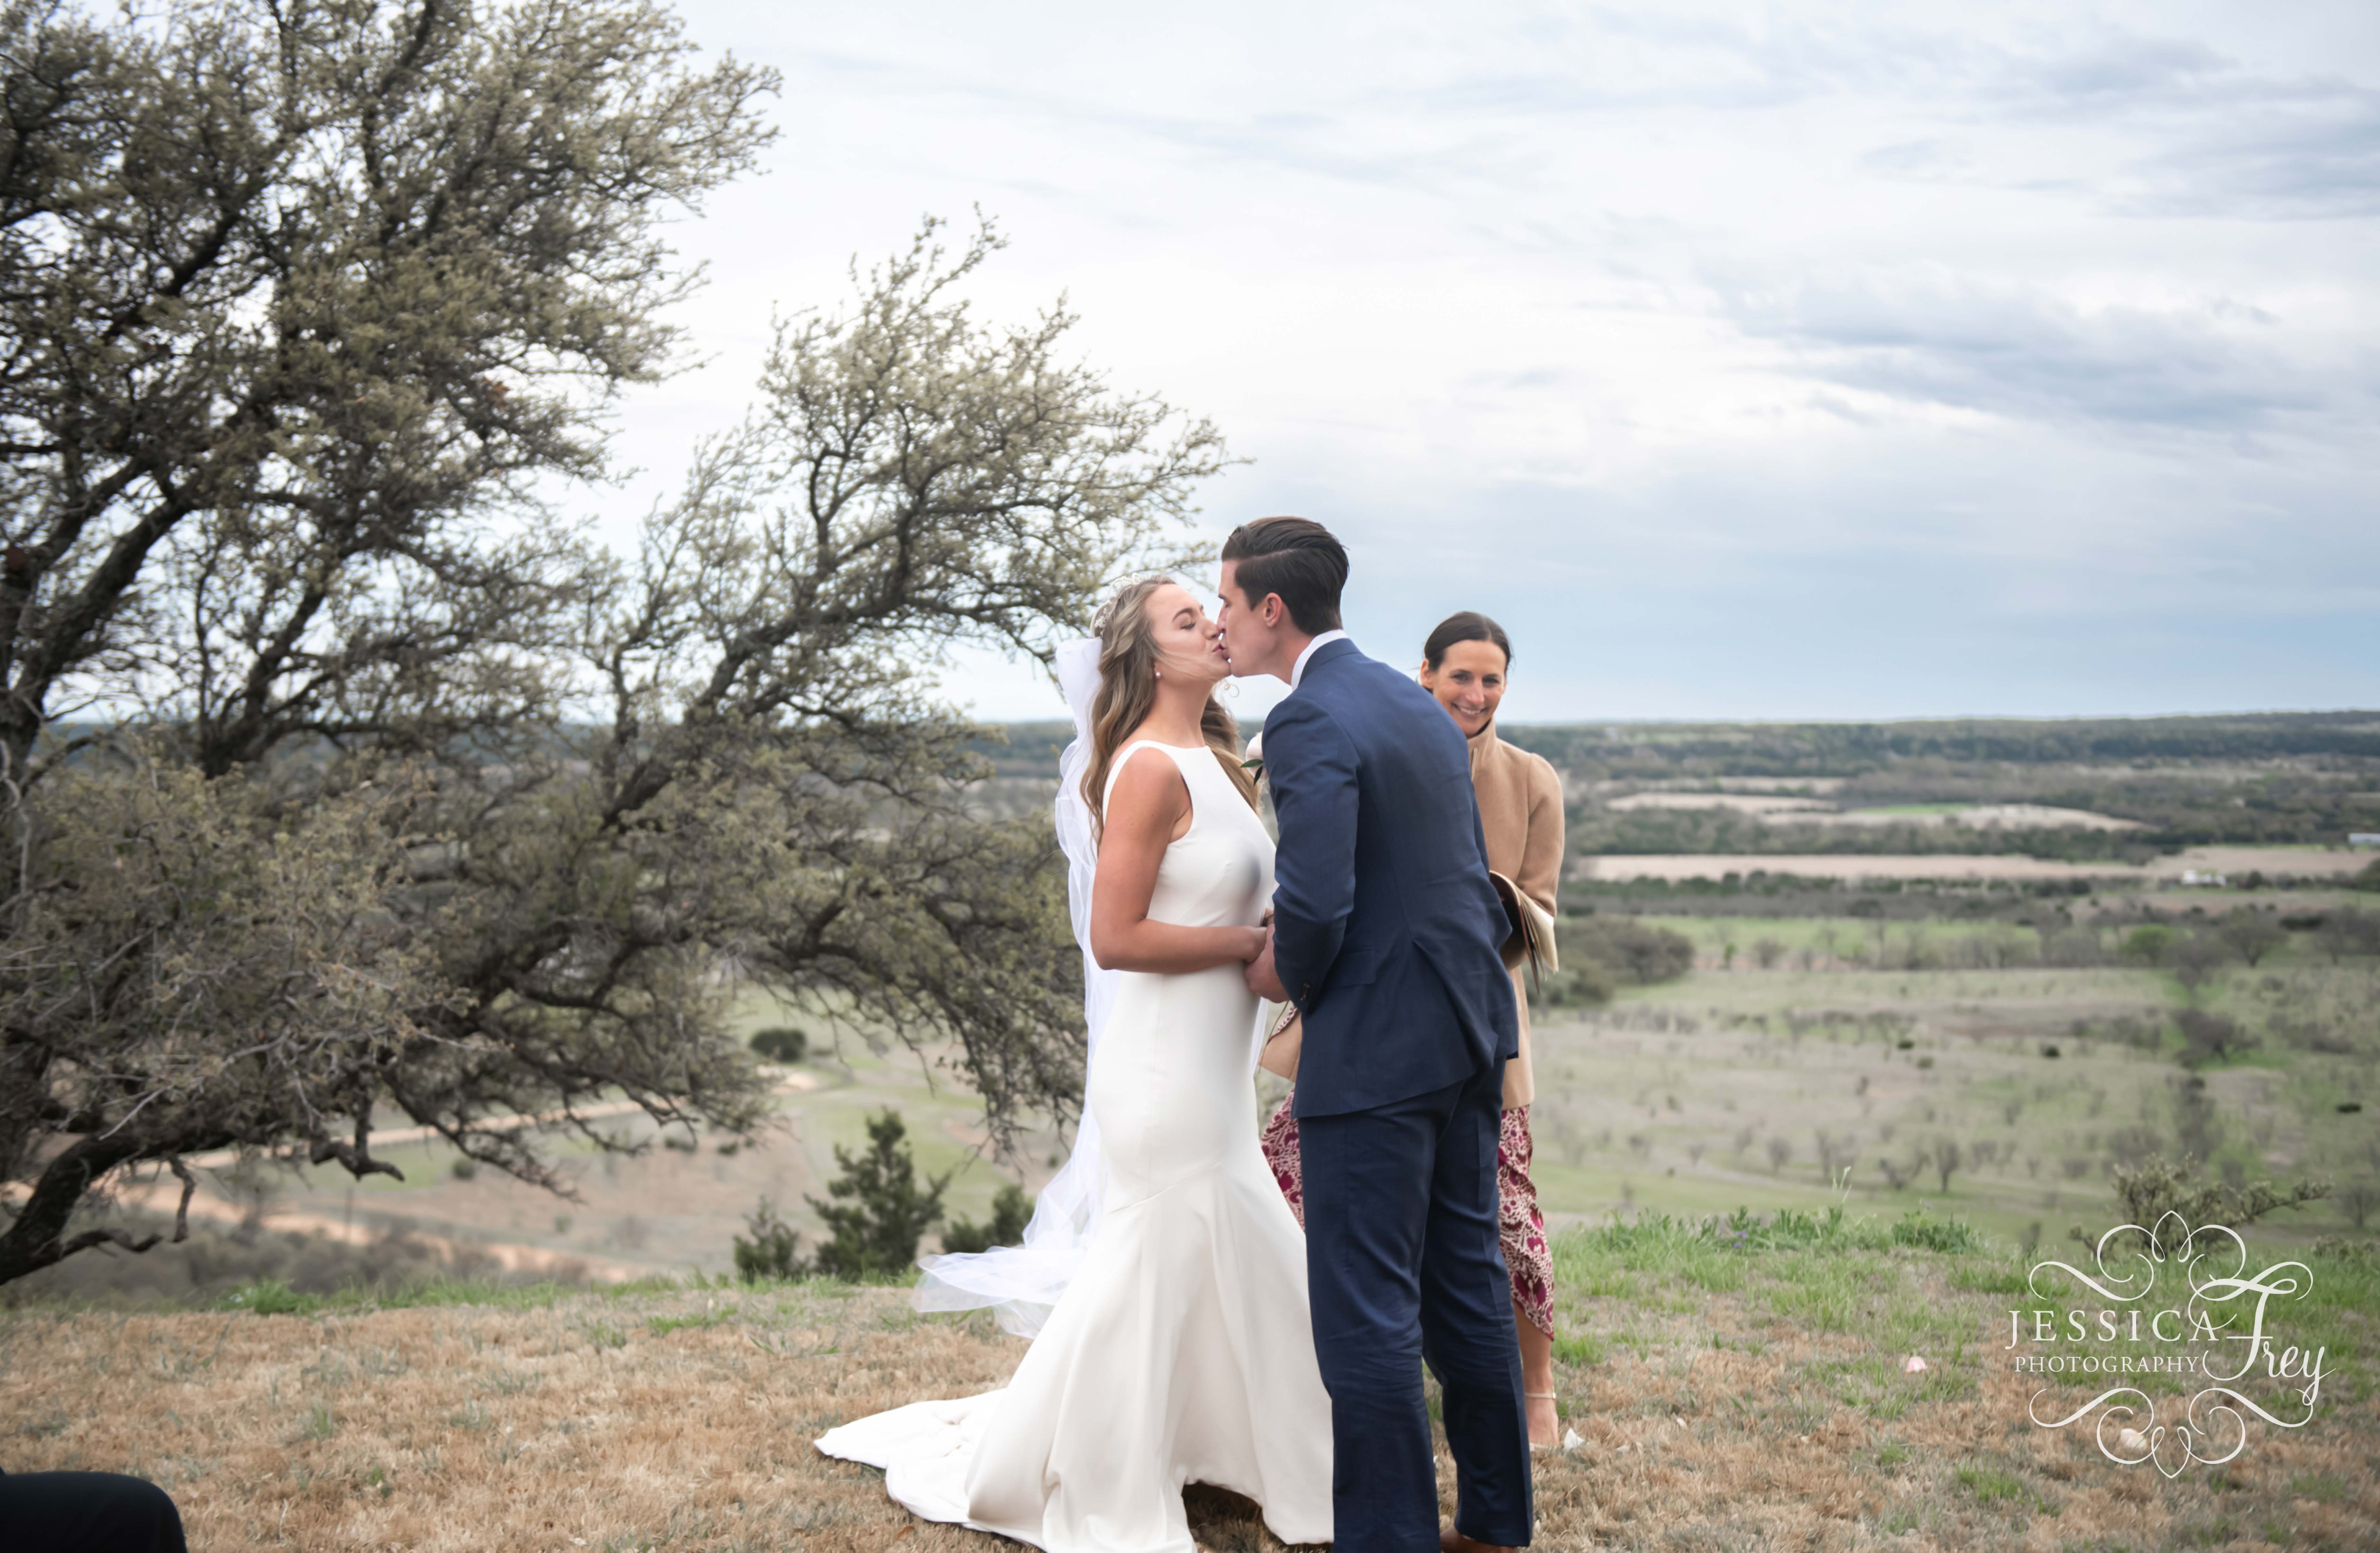 First Kiss as husband and wife at Contigo Ranch Wedding Ceremony